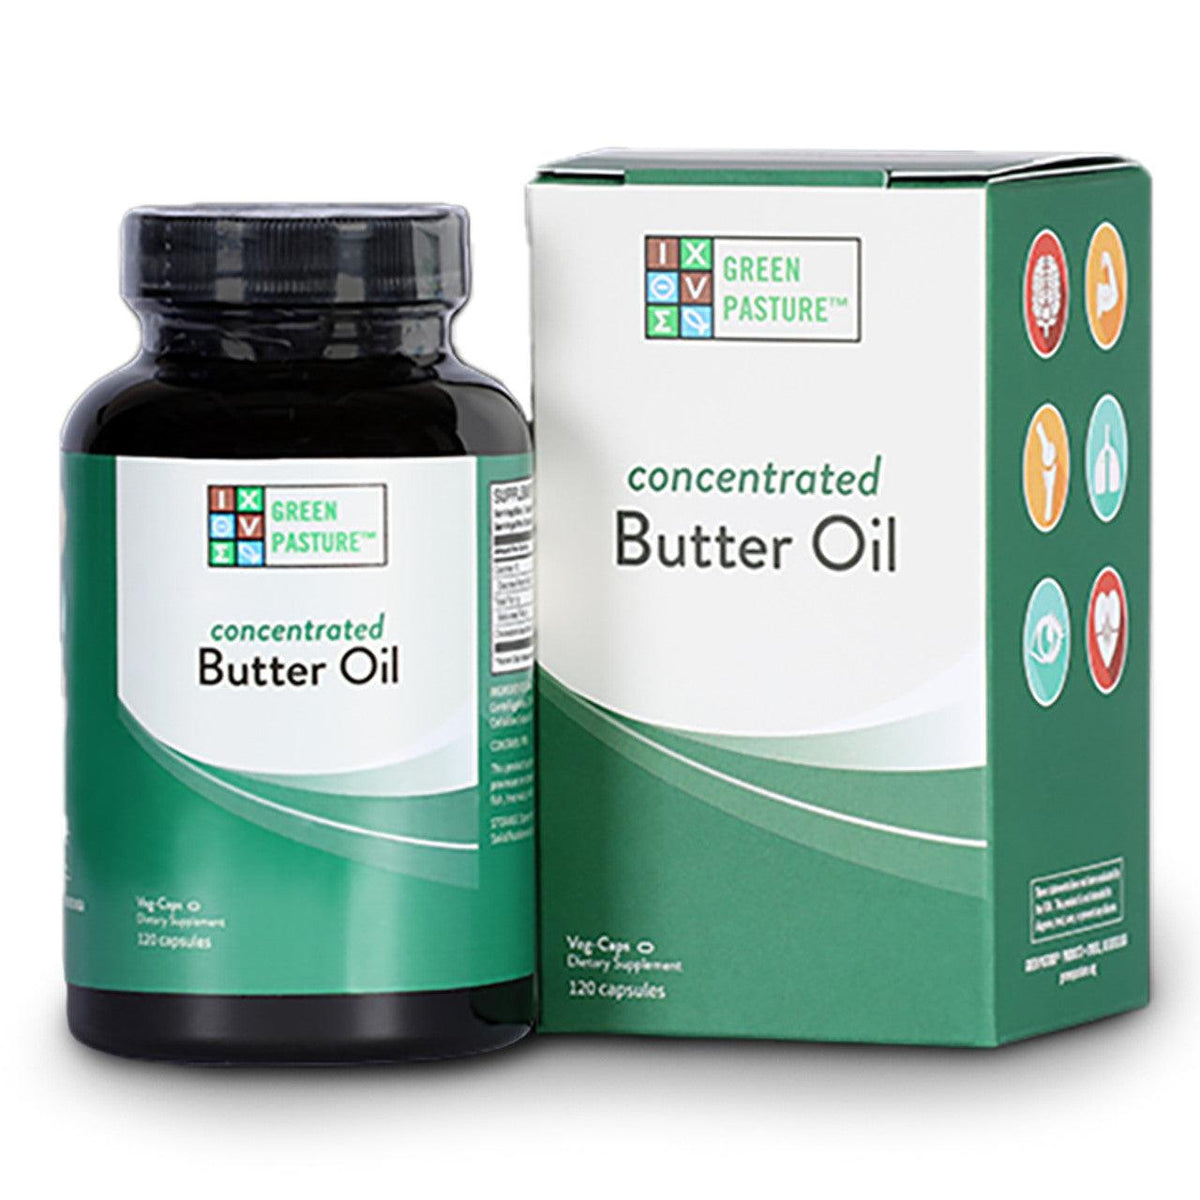 Green Pasture Concentrated Butter Oil (Previously known as X-Factor Gold) 120 cap Supplements - EFAs at Village Vitamin Store